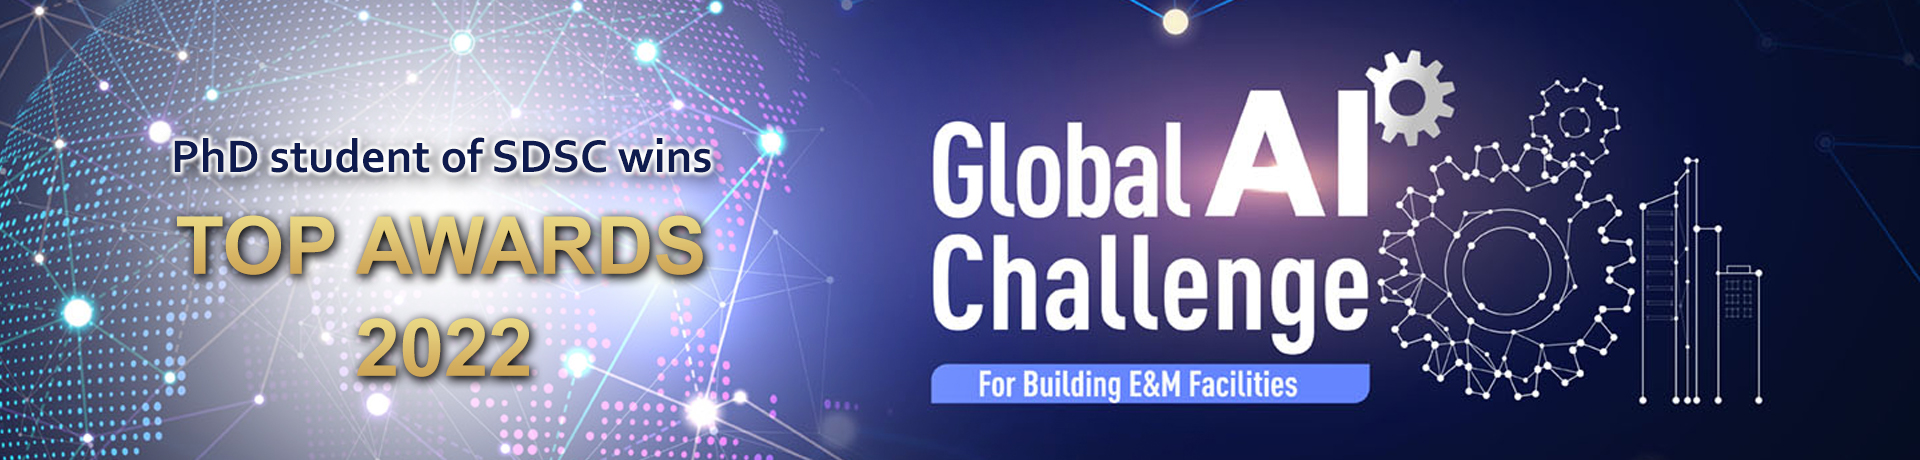 PhD student of SDSC wins top awards at the Global AI Challenge for Building E&M Facilities – AI Competition